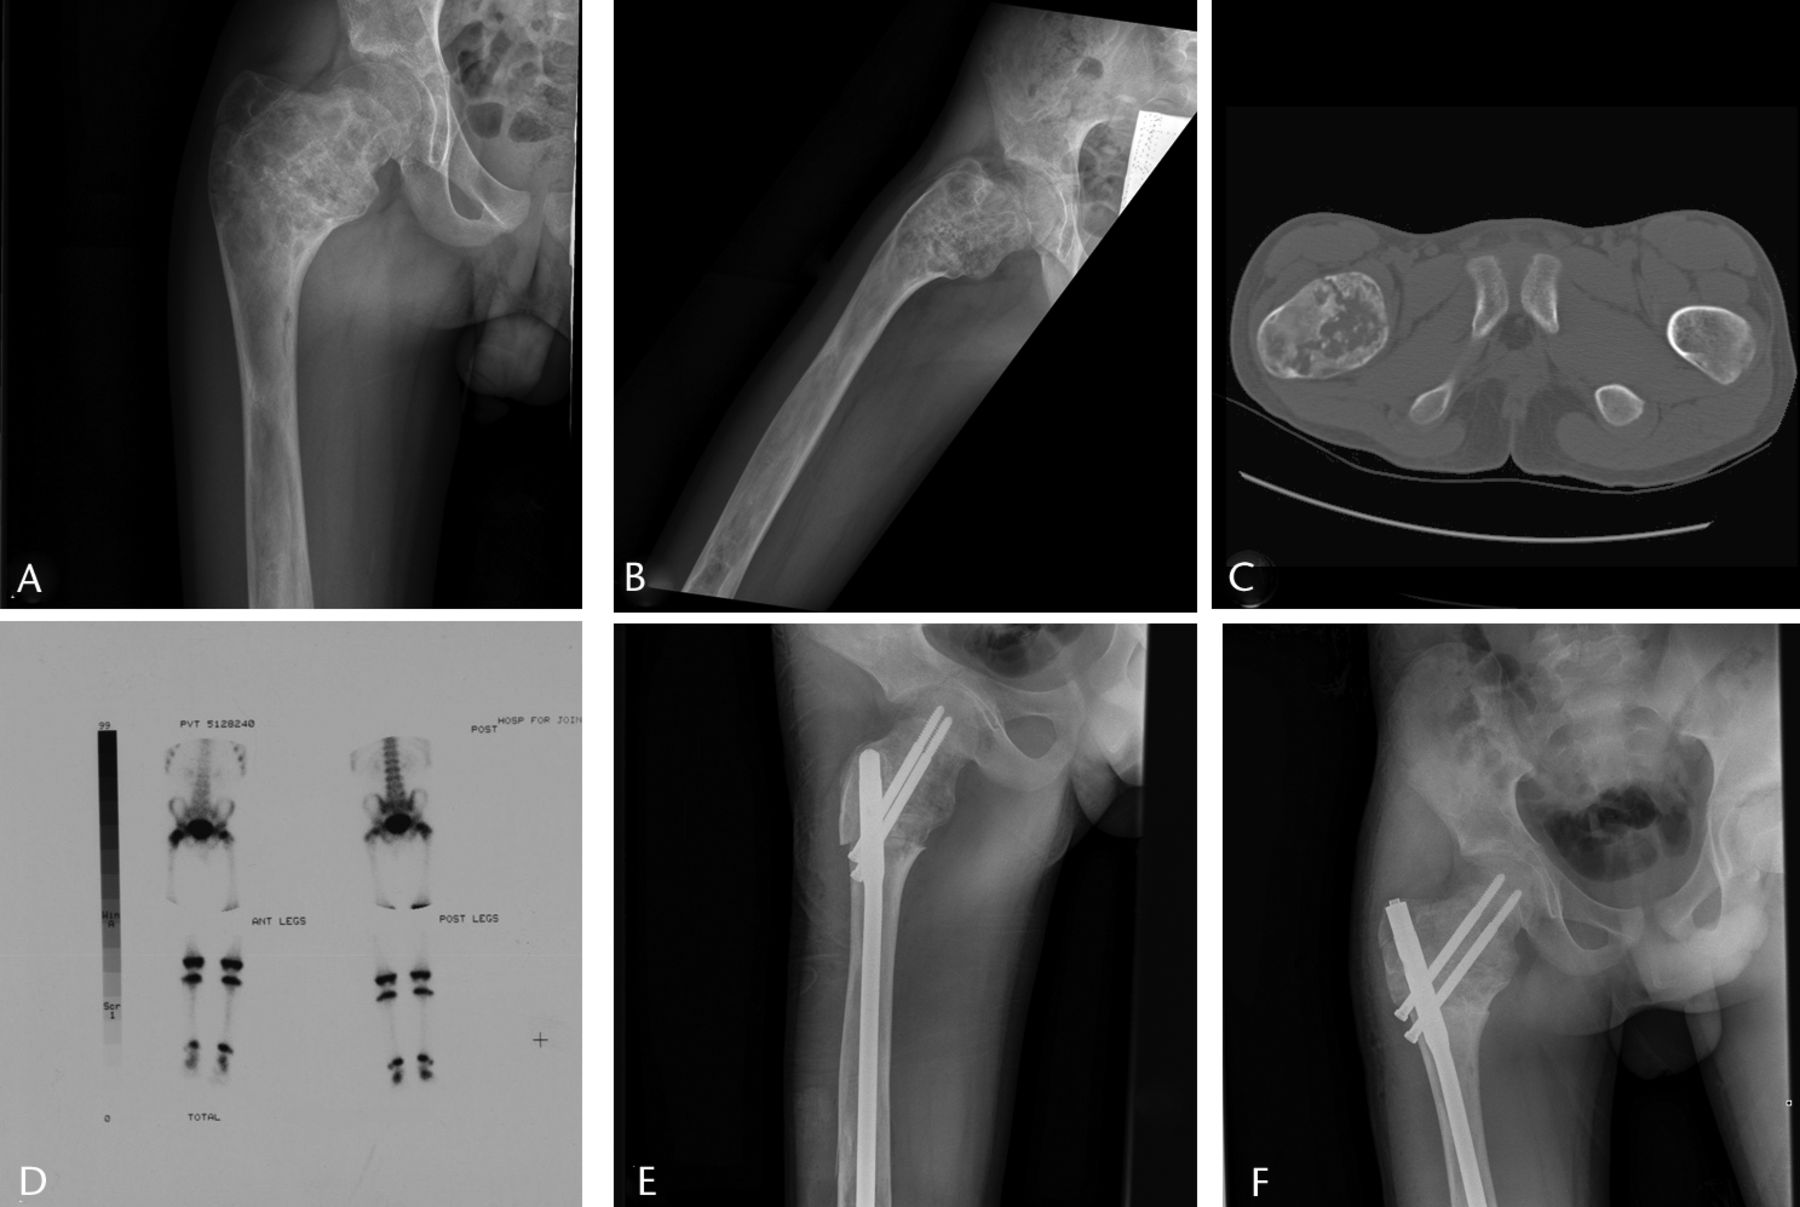 Fig. 3 
          Imaging in a 14-year-old male patient
with a sudden onset of right hip pain, a) and b) radiographs at
presentation, showing a Shepherd deformity and pathological fracture
of the proximal femur, c) an axial CT scan showing the fracture,
d) a bone scan, used to rule out polyostotic fibrous dysplasia,
showing that it was confined to the right proximal femur, e) after
proximal femoral osteotomy to correct the deformity and fixation
with intramedullary nail, and f) at two months post-operatively
showing healing of the fracture and osteotomies, at which point
the patient had no pain.
        